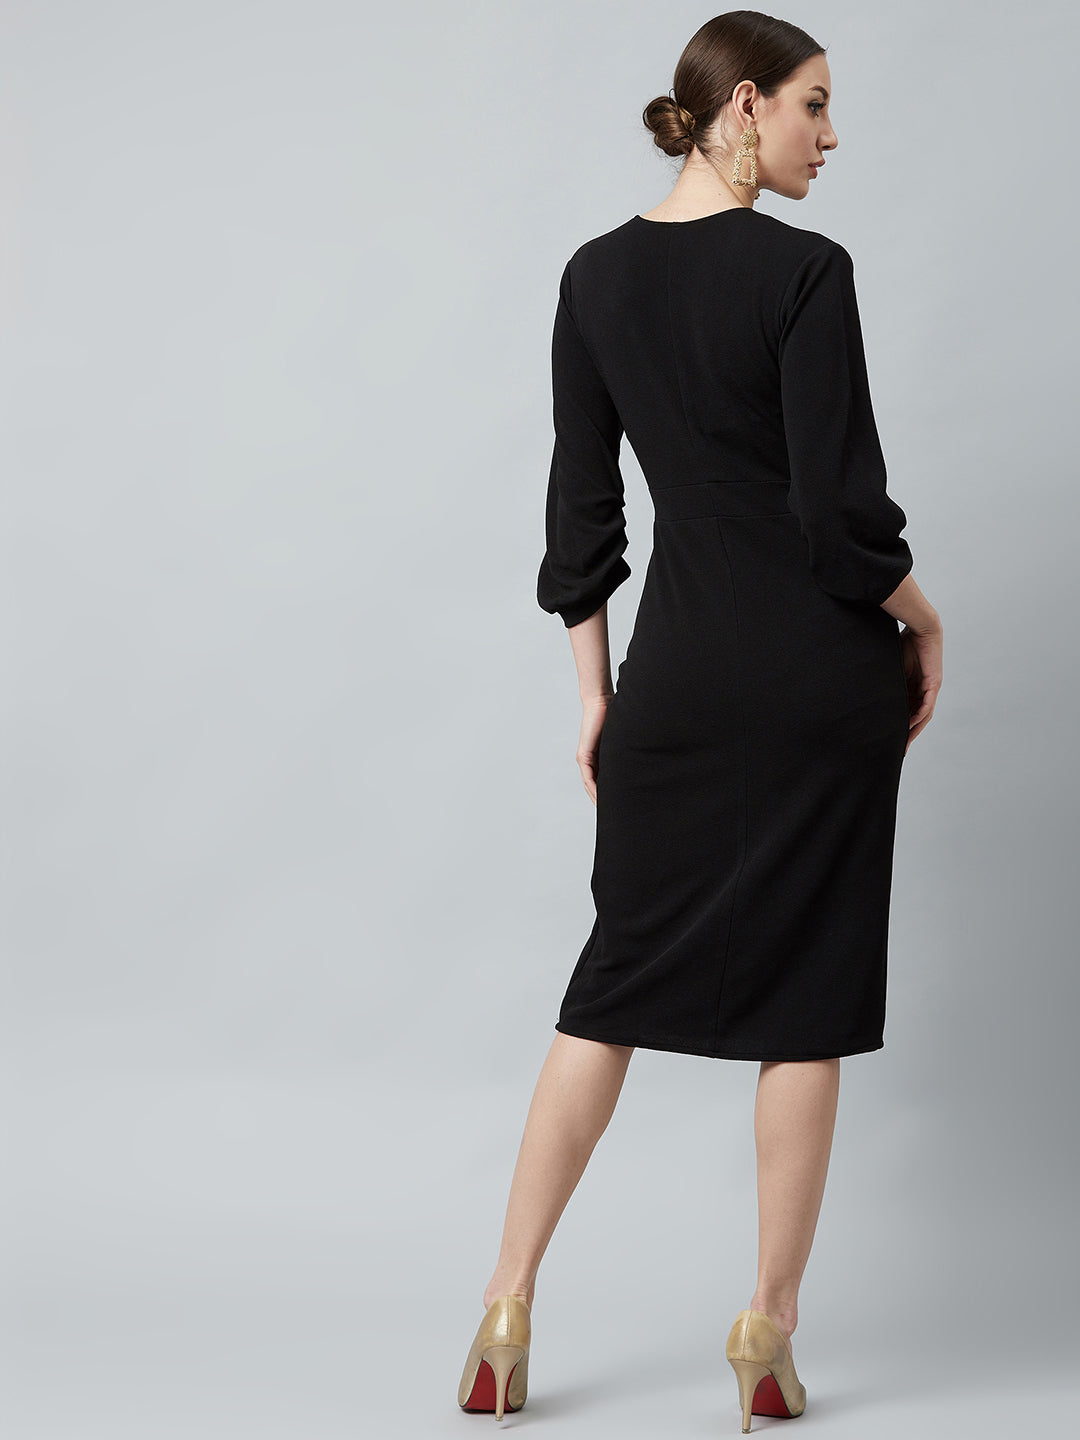 Little Black Dresses | Adrianna Papell (Wedding, Plus Size, Short, Evening,  Sleeved & more)